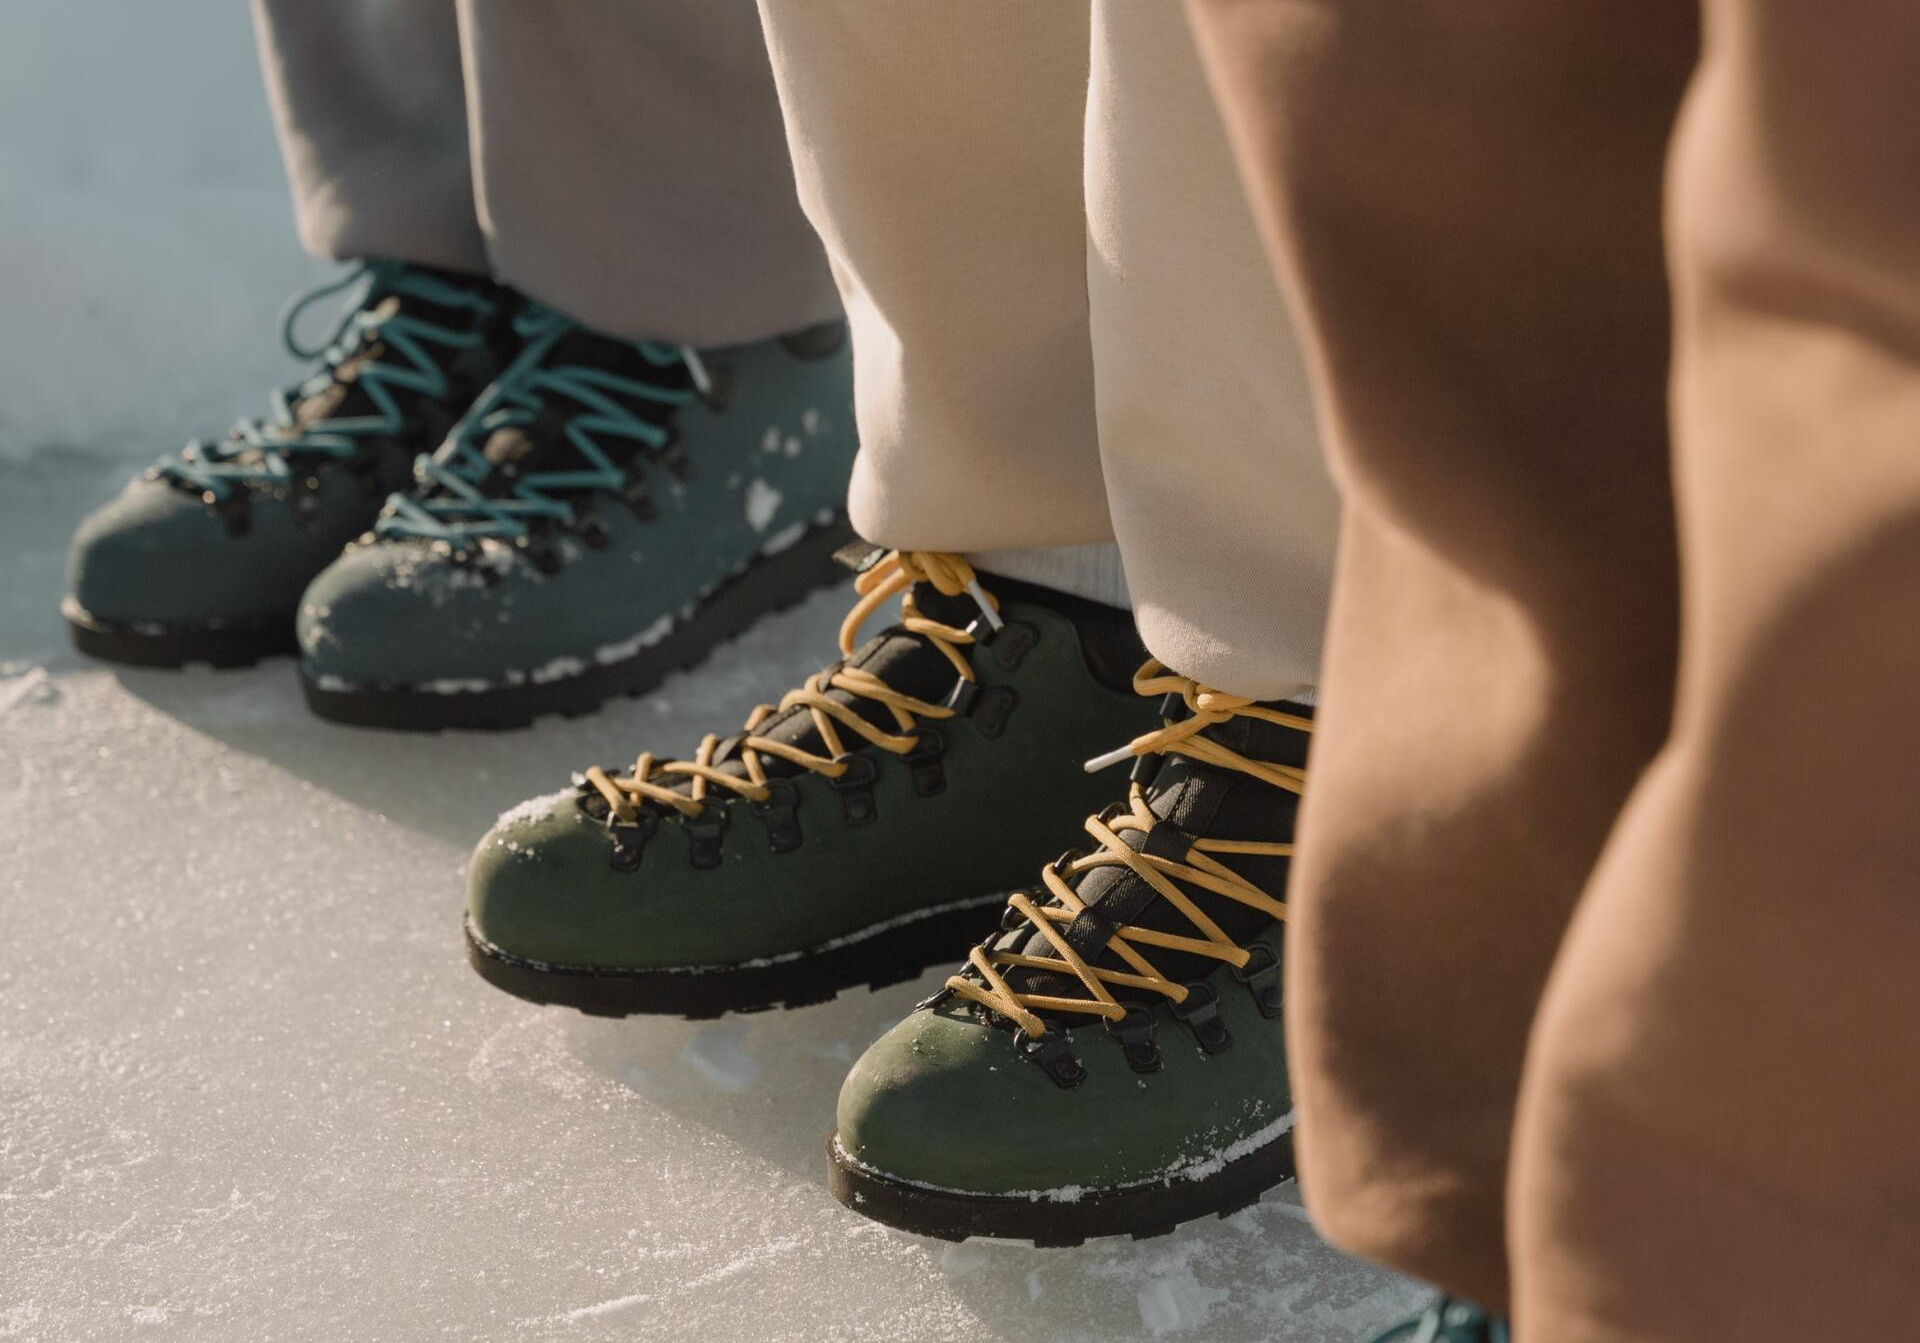 People lined up showing the correct foot wear for a winter hike.